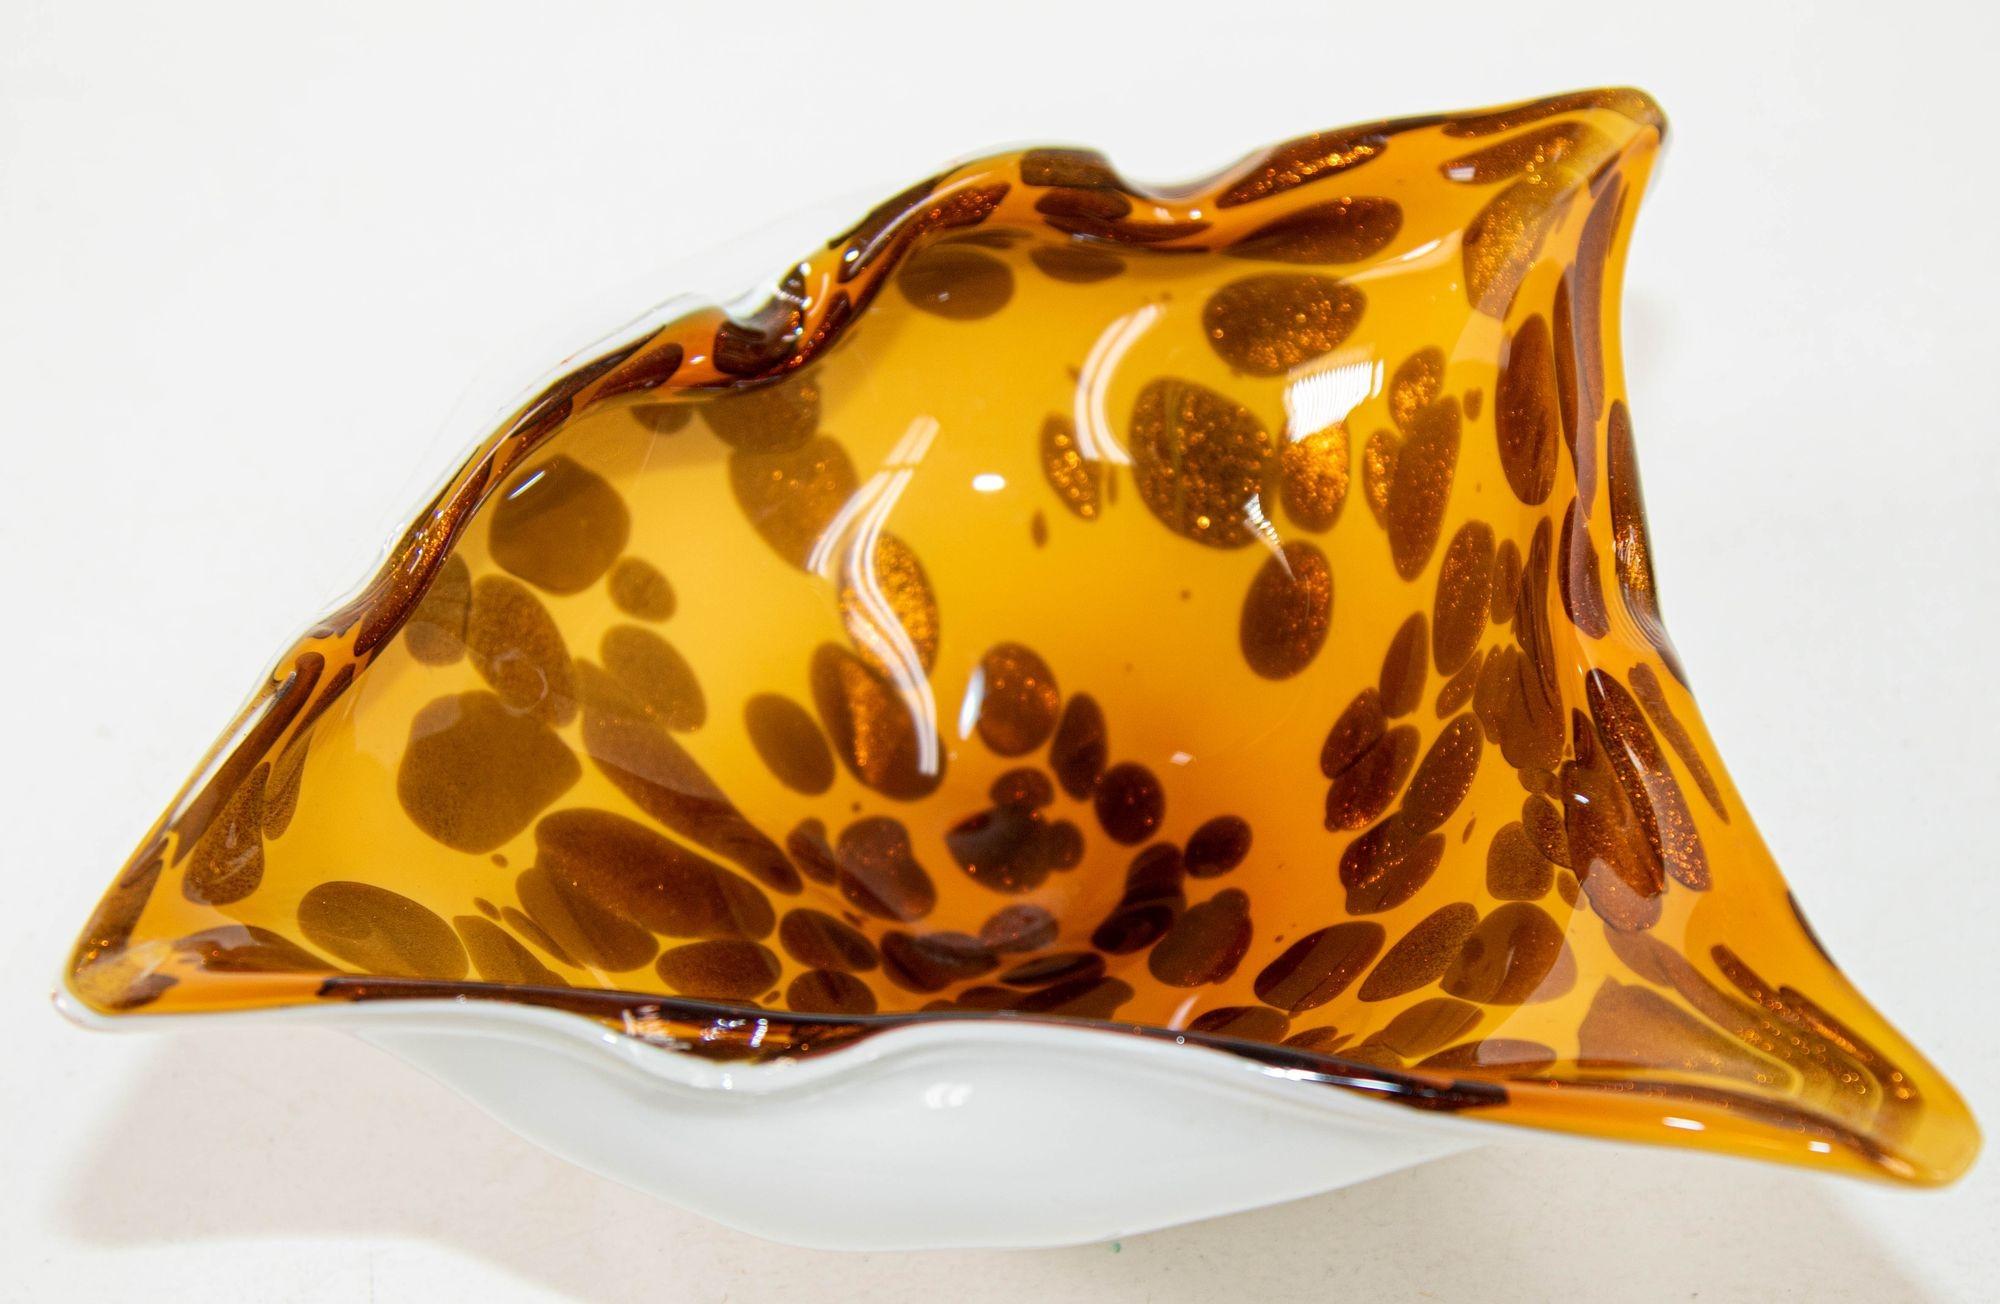 Murano Art Glass Manta Ray Tortoise Spotted Bowl Ashtray Vintage 1960s In Good Condition For Sale In North Hollywood, CA